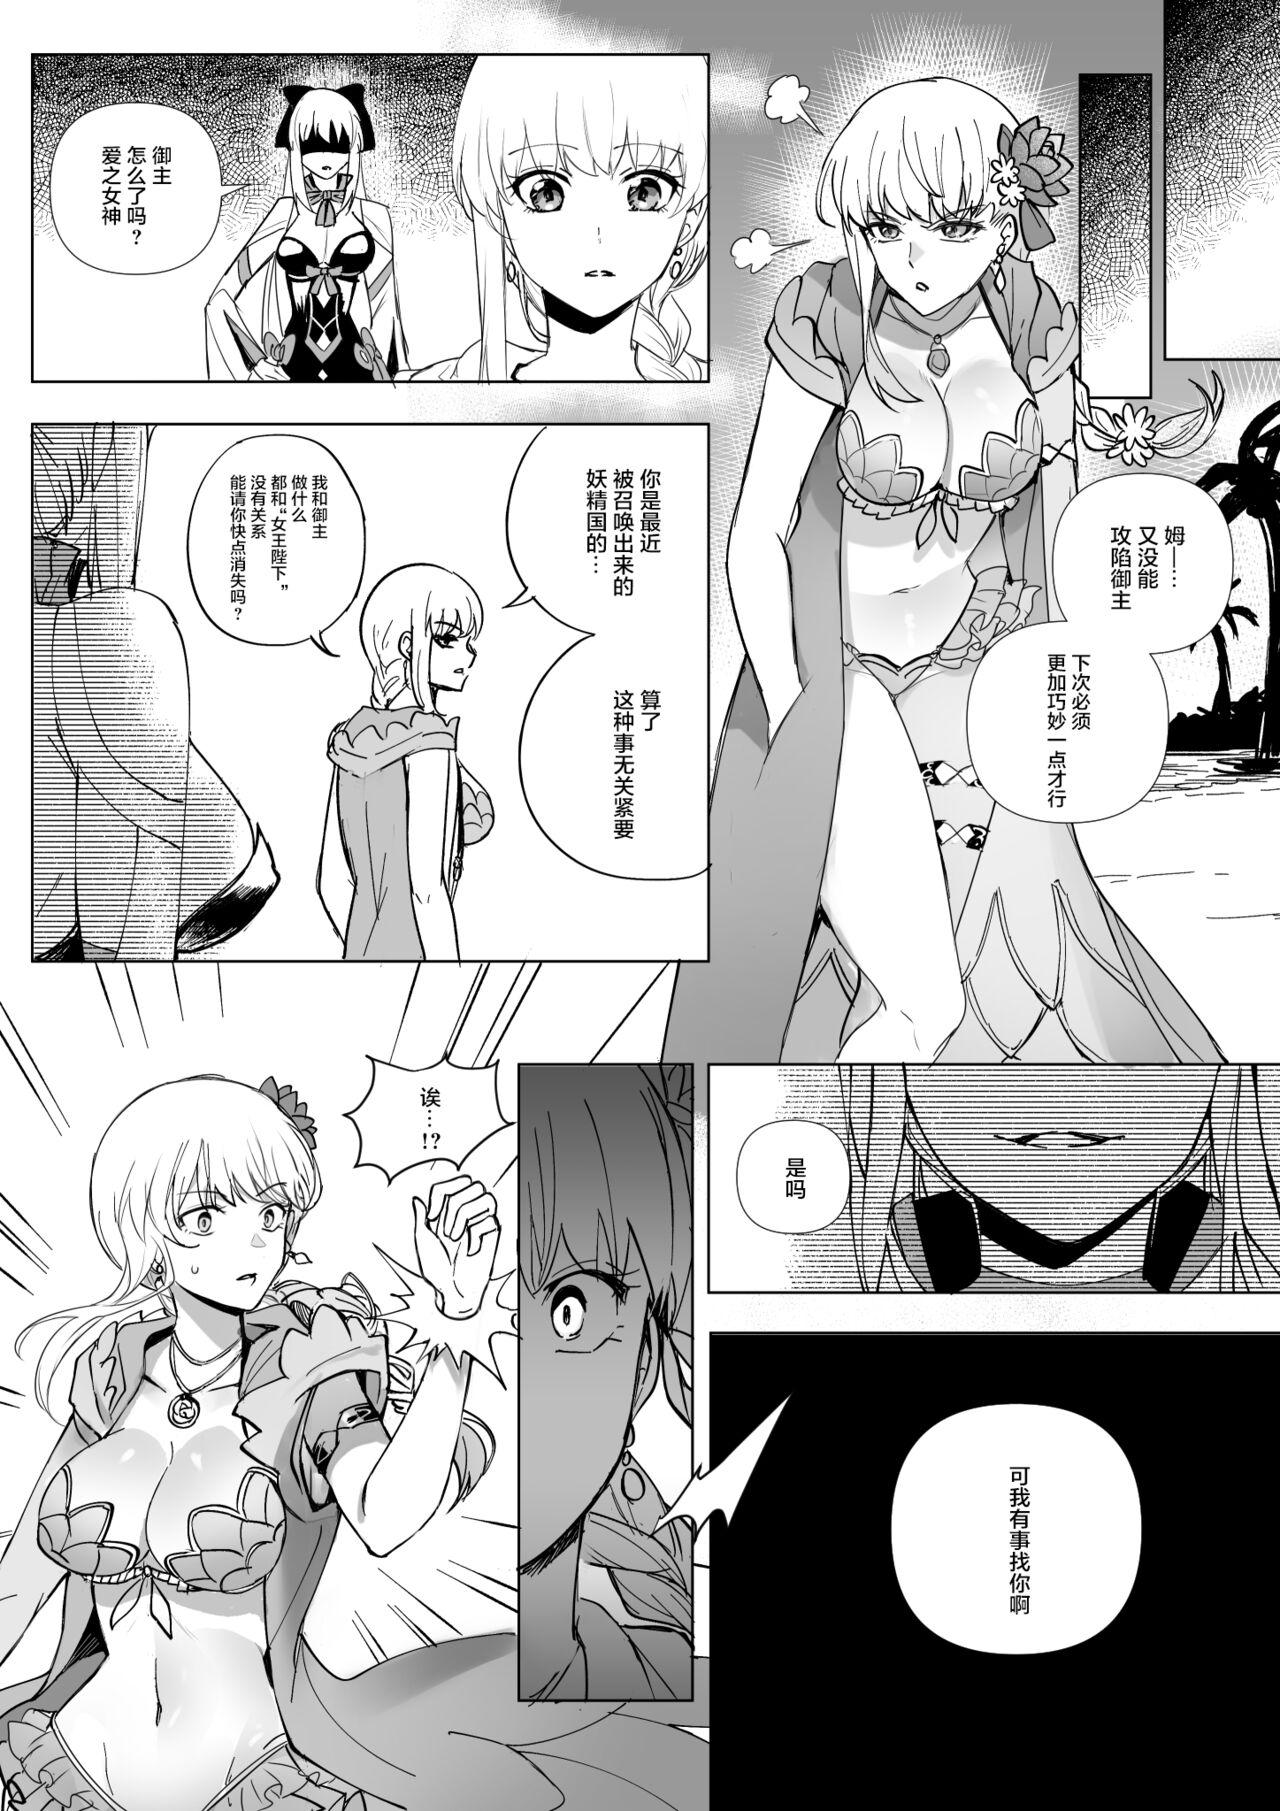 Family Roleplay FGO モルガン&水着カーマ憑依 - Fate grand order Leaked - Page 5